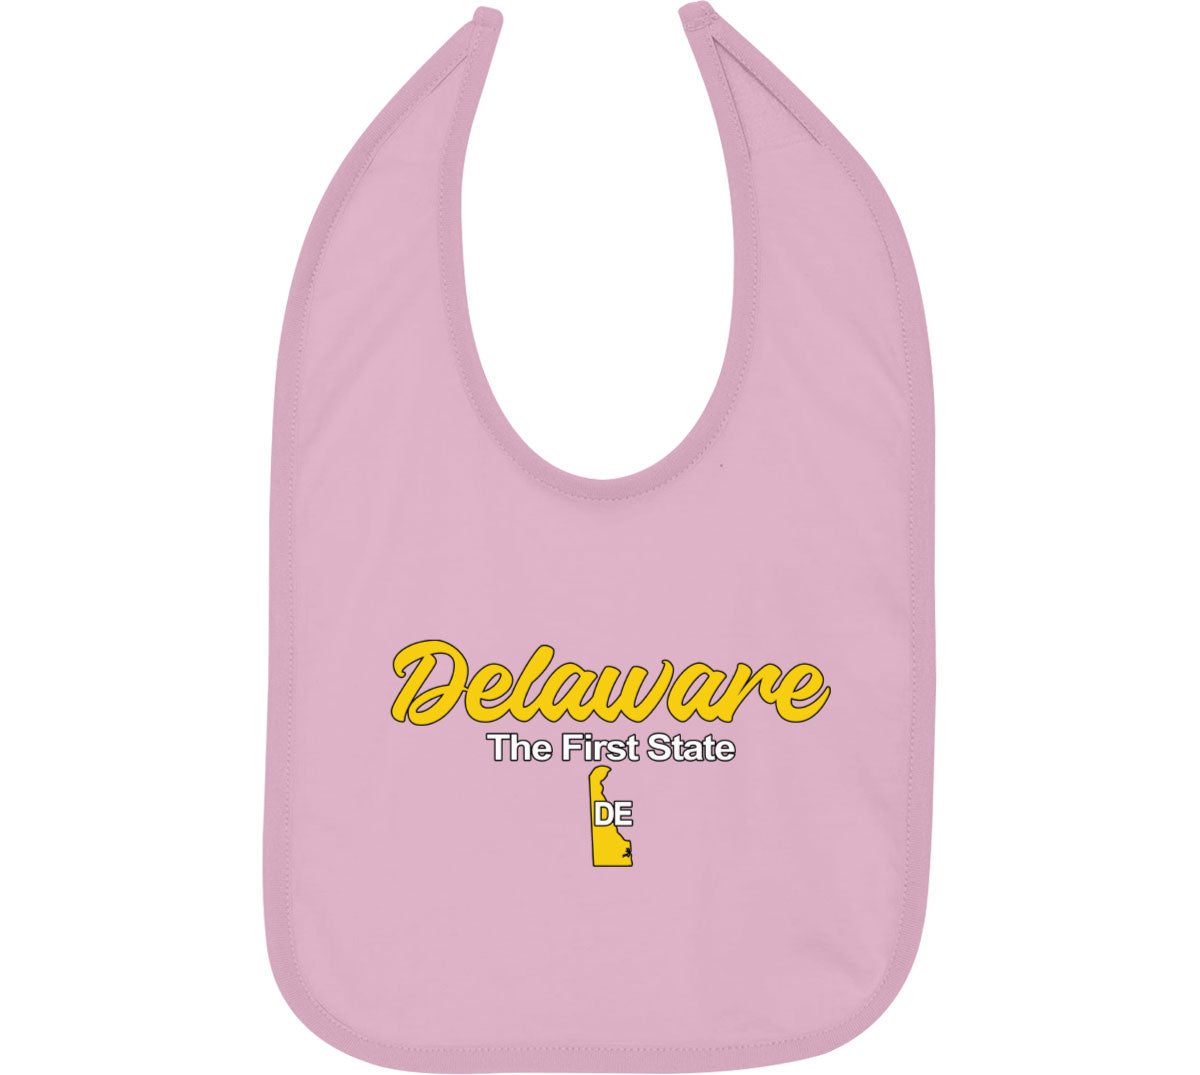 Delaware The First State Baby Bib